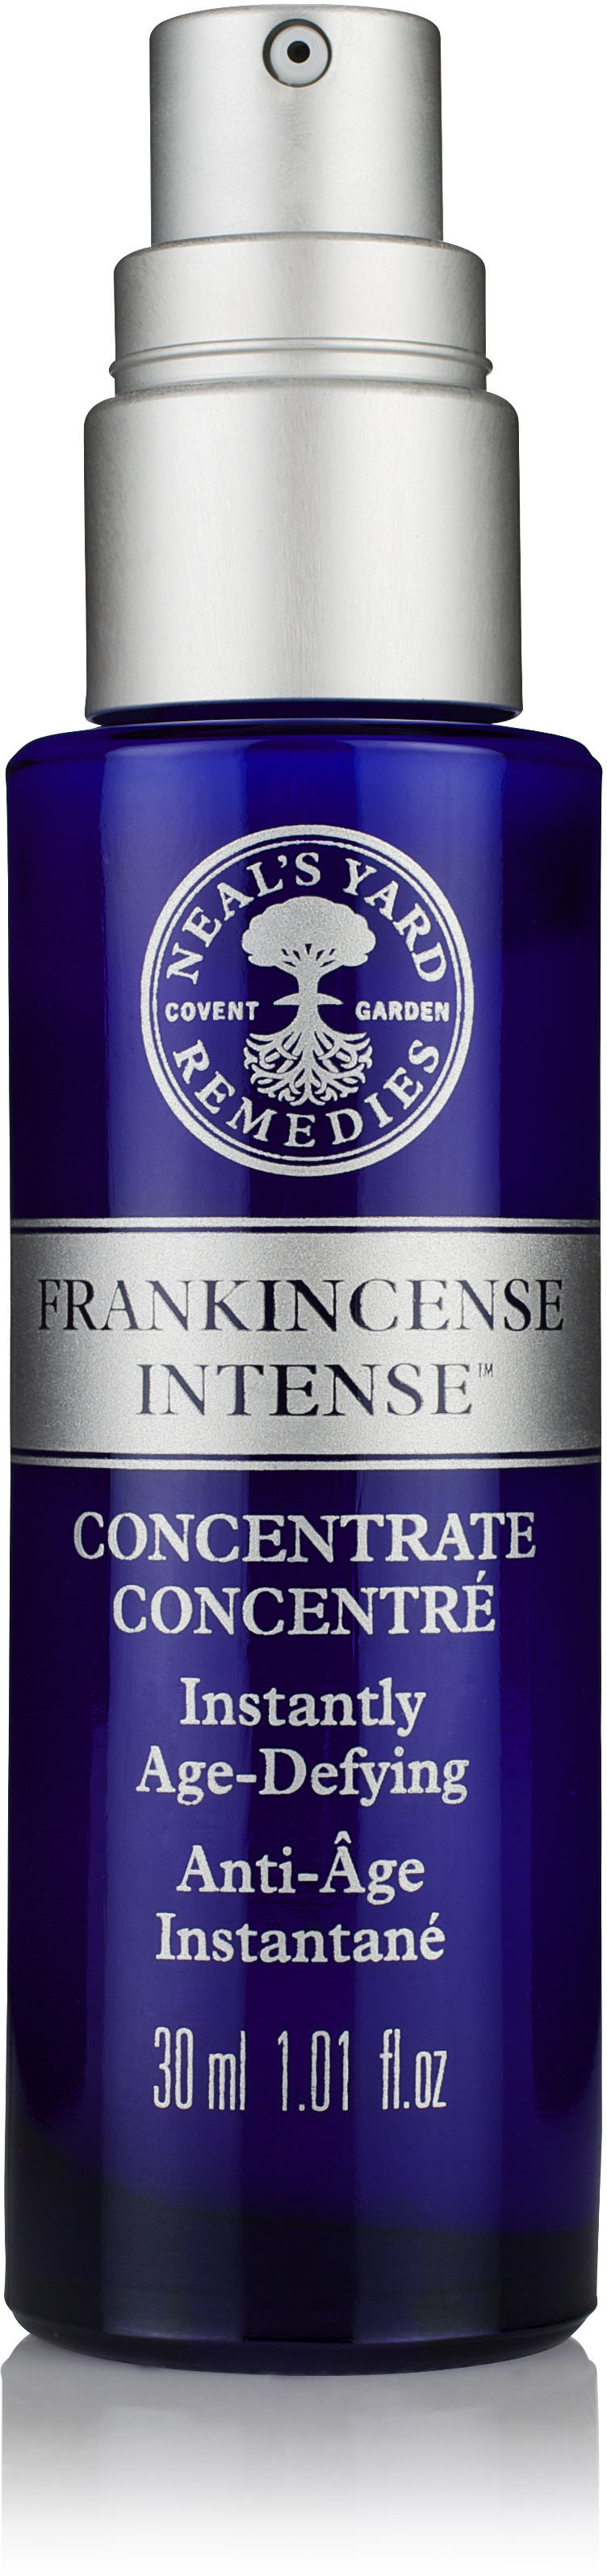 Neal’s Yard Remedies Frankincense Intense Concentrate 30ml